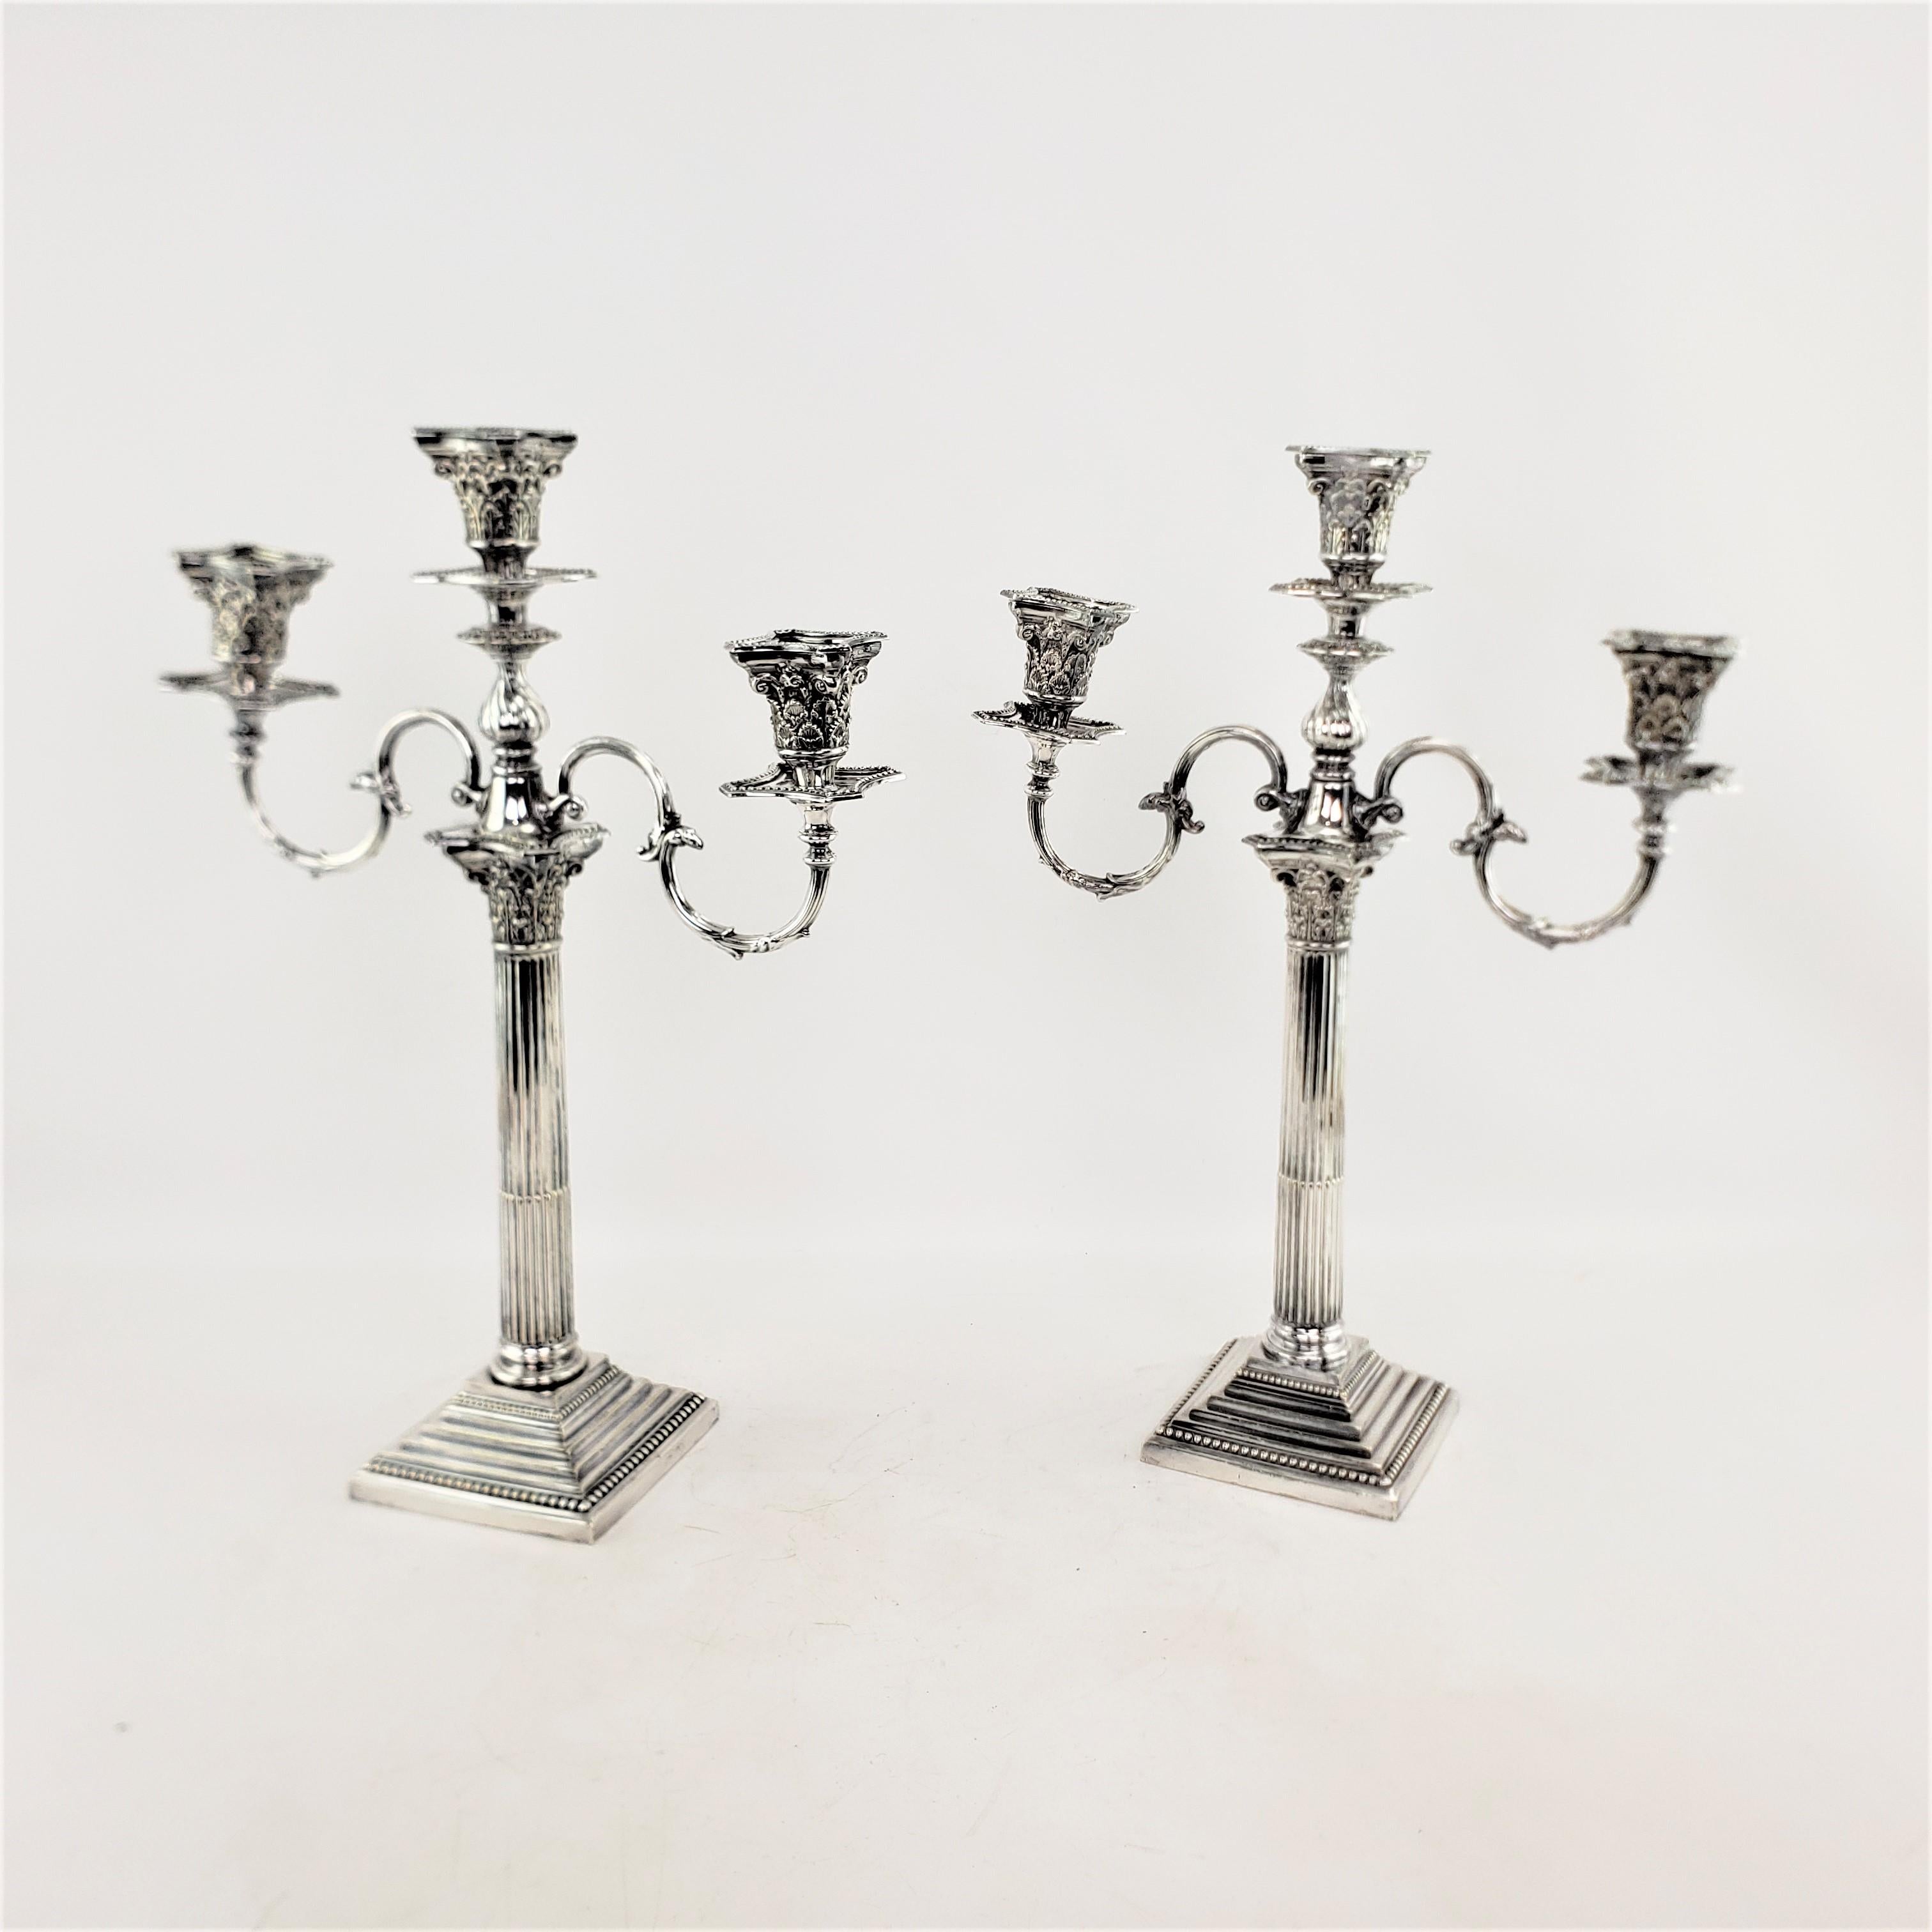 English Pair of Antique Mappin & Webb Convertible Candelabras in Corinthian Column Style For Sale